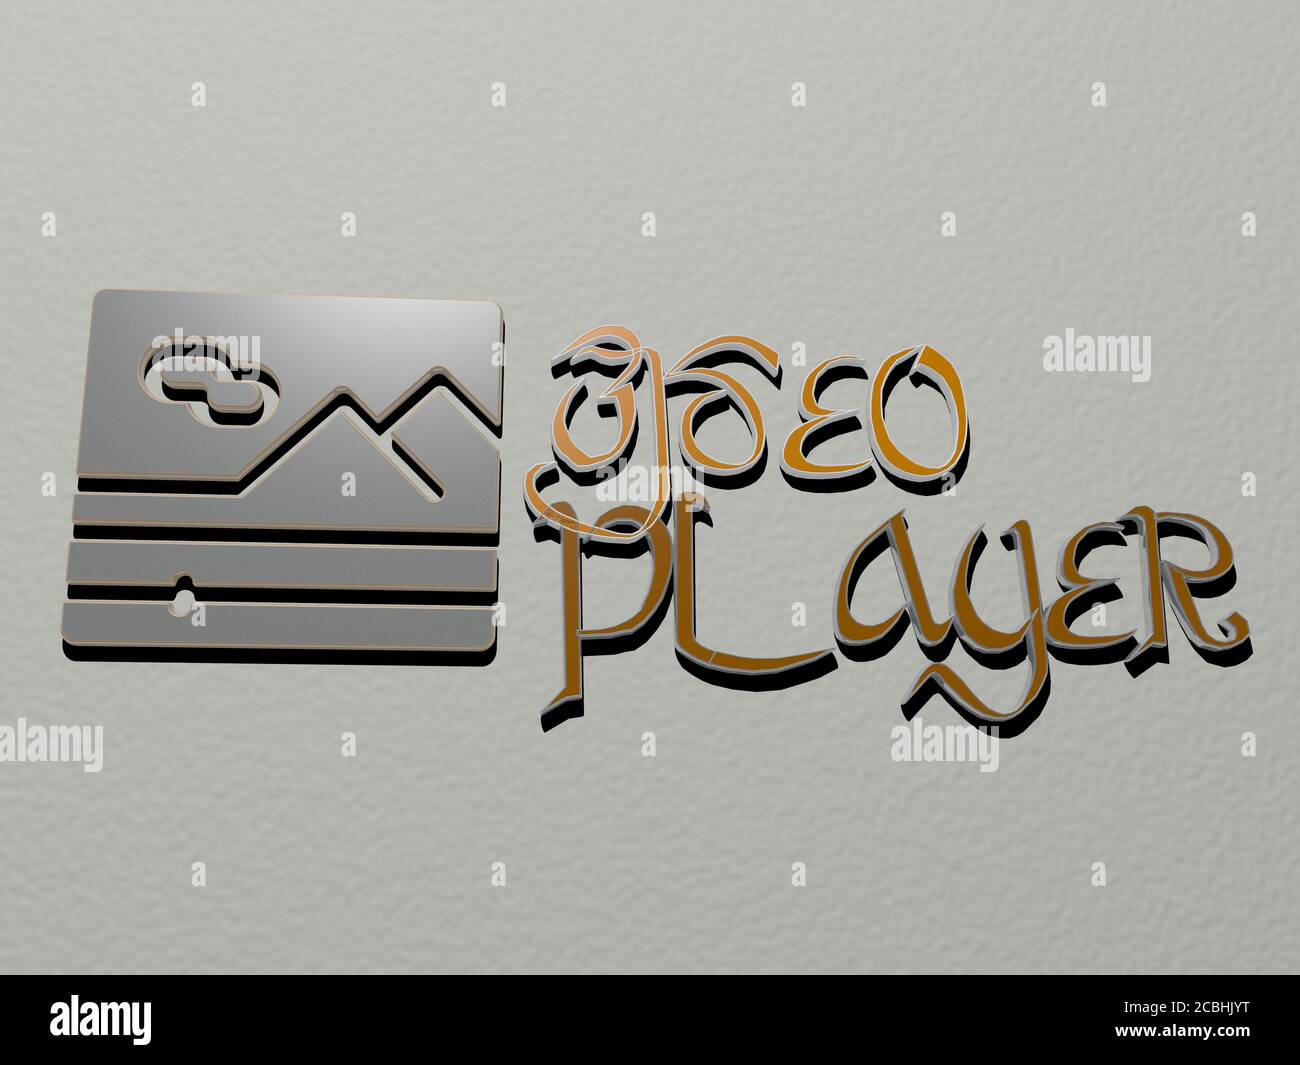 VIDEO PLAYER icon and text on the wall - 3D illustration for background and camera Stock Photo